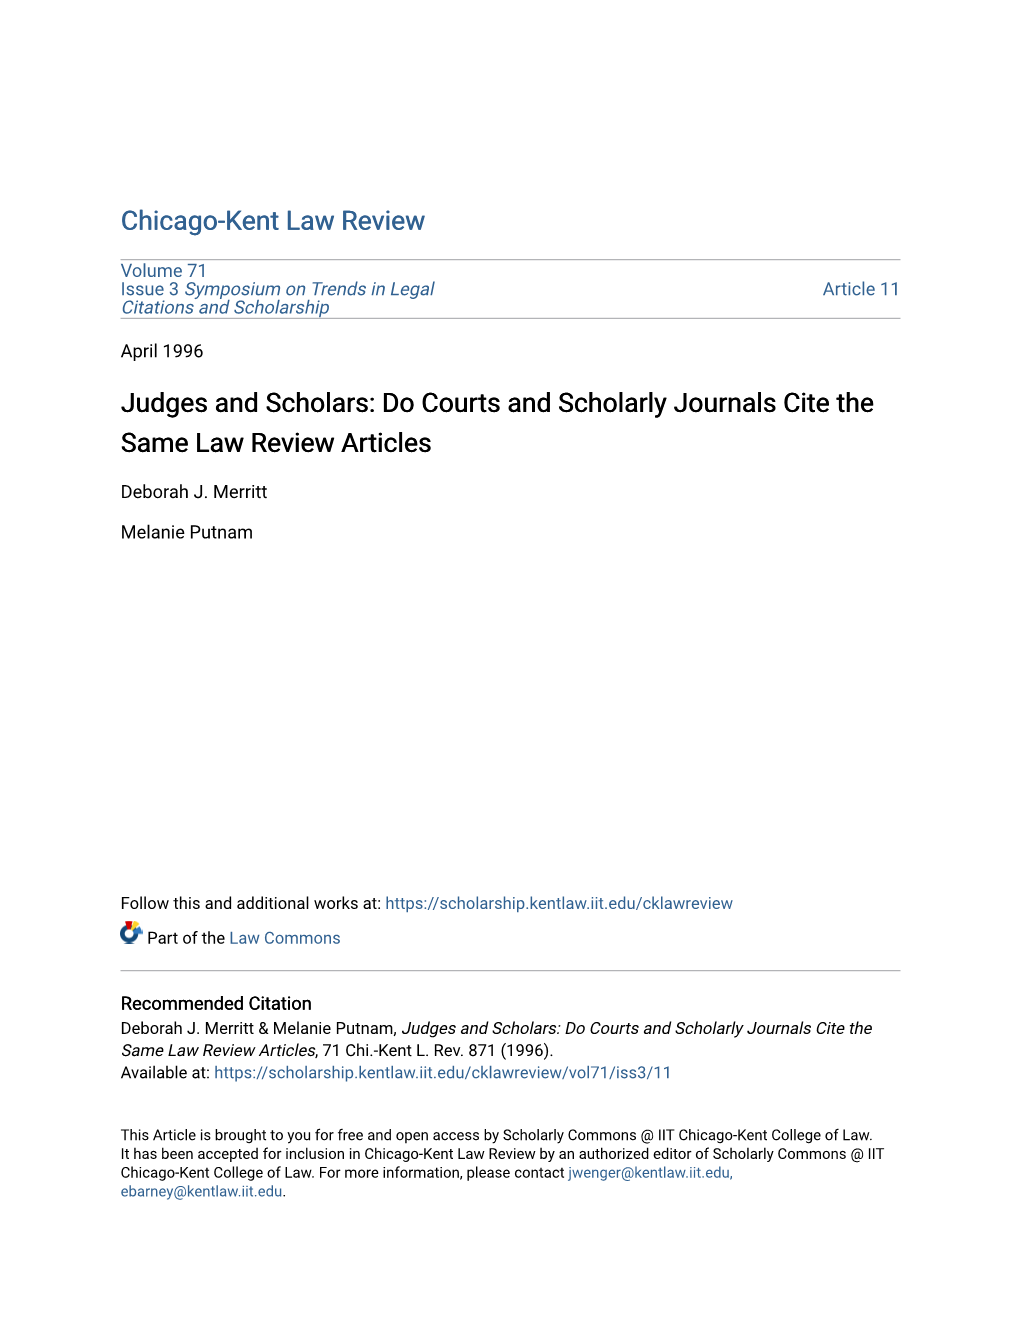 Do Courts and Scholarly Journals Cite the Same Law Review Articles